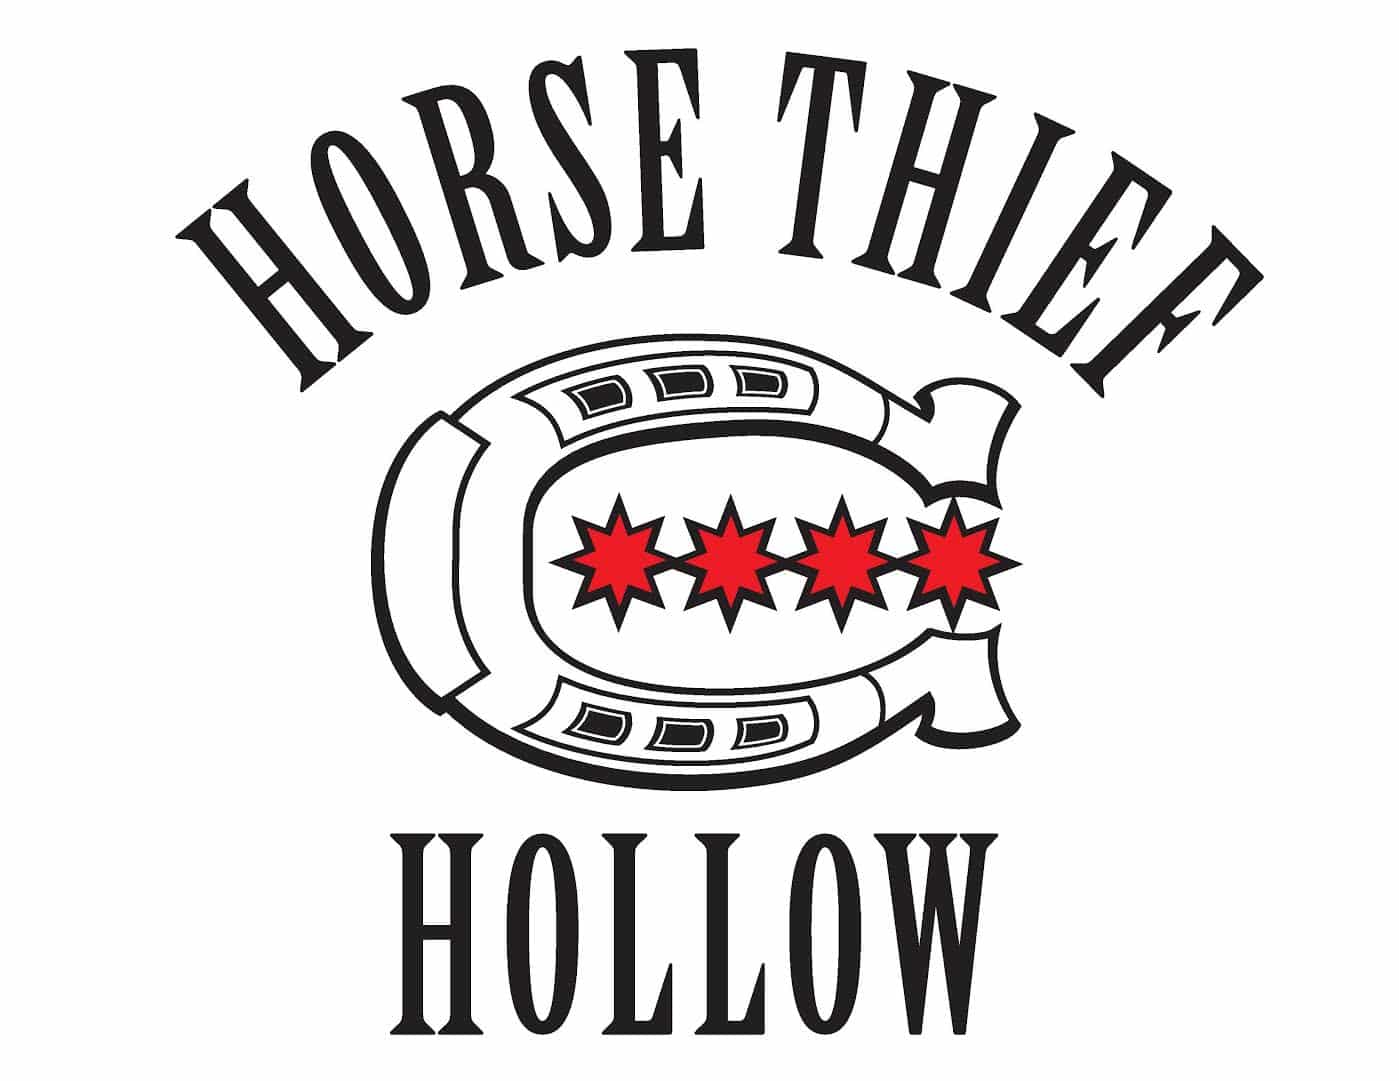 Horse Thief Hollow Brewing Co.